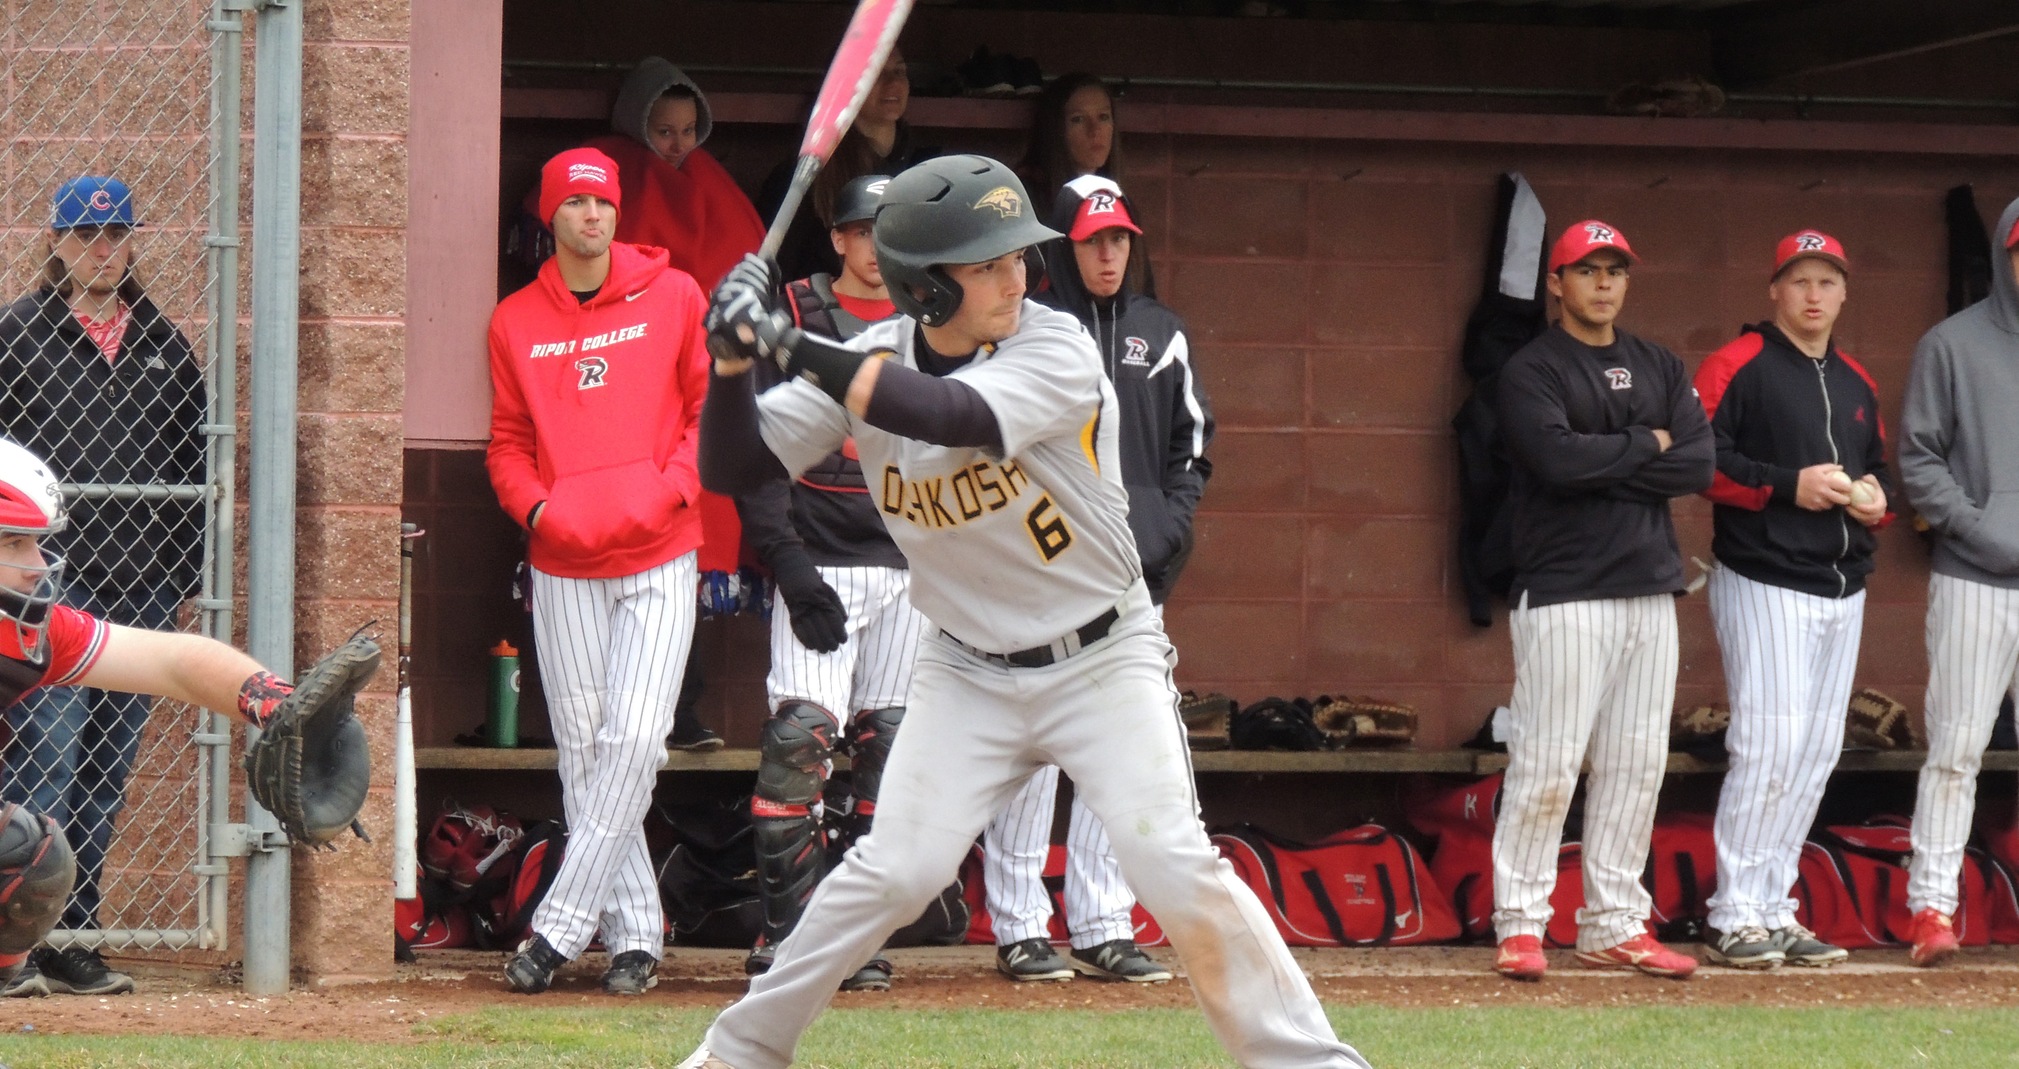 Jack Paulson had three hits and three runs batted in against Ripon College.